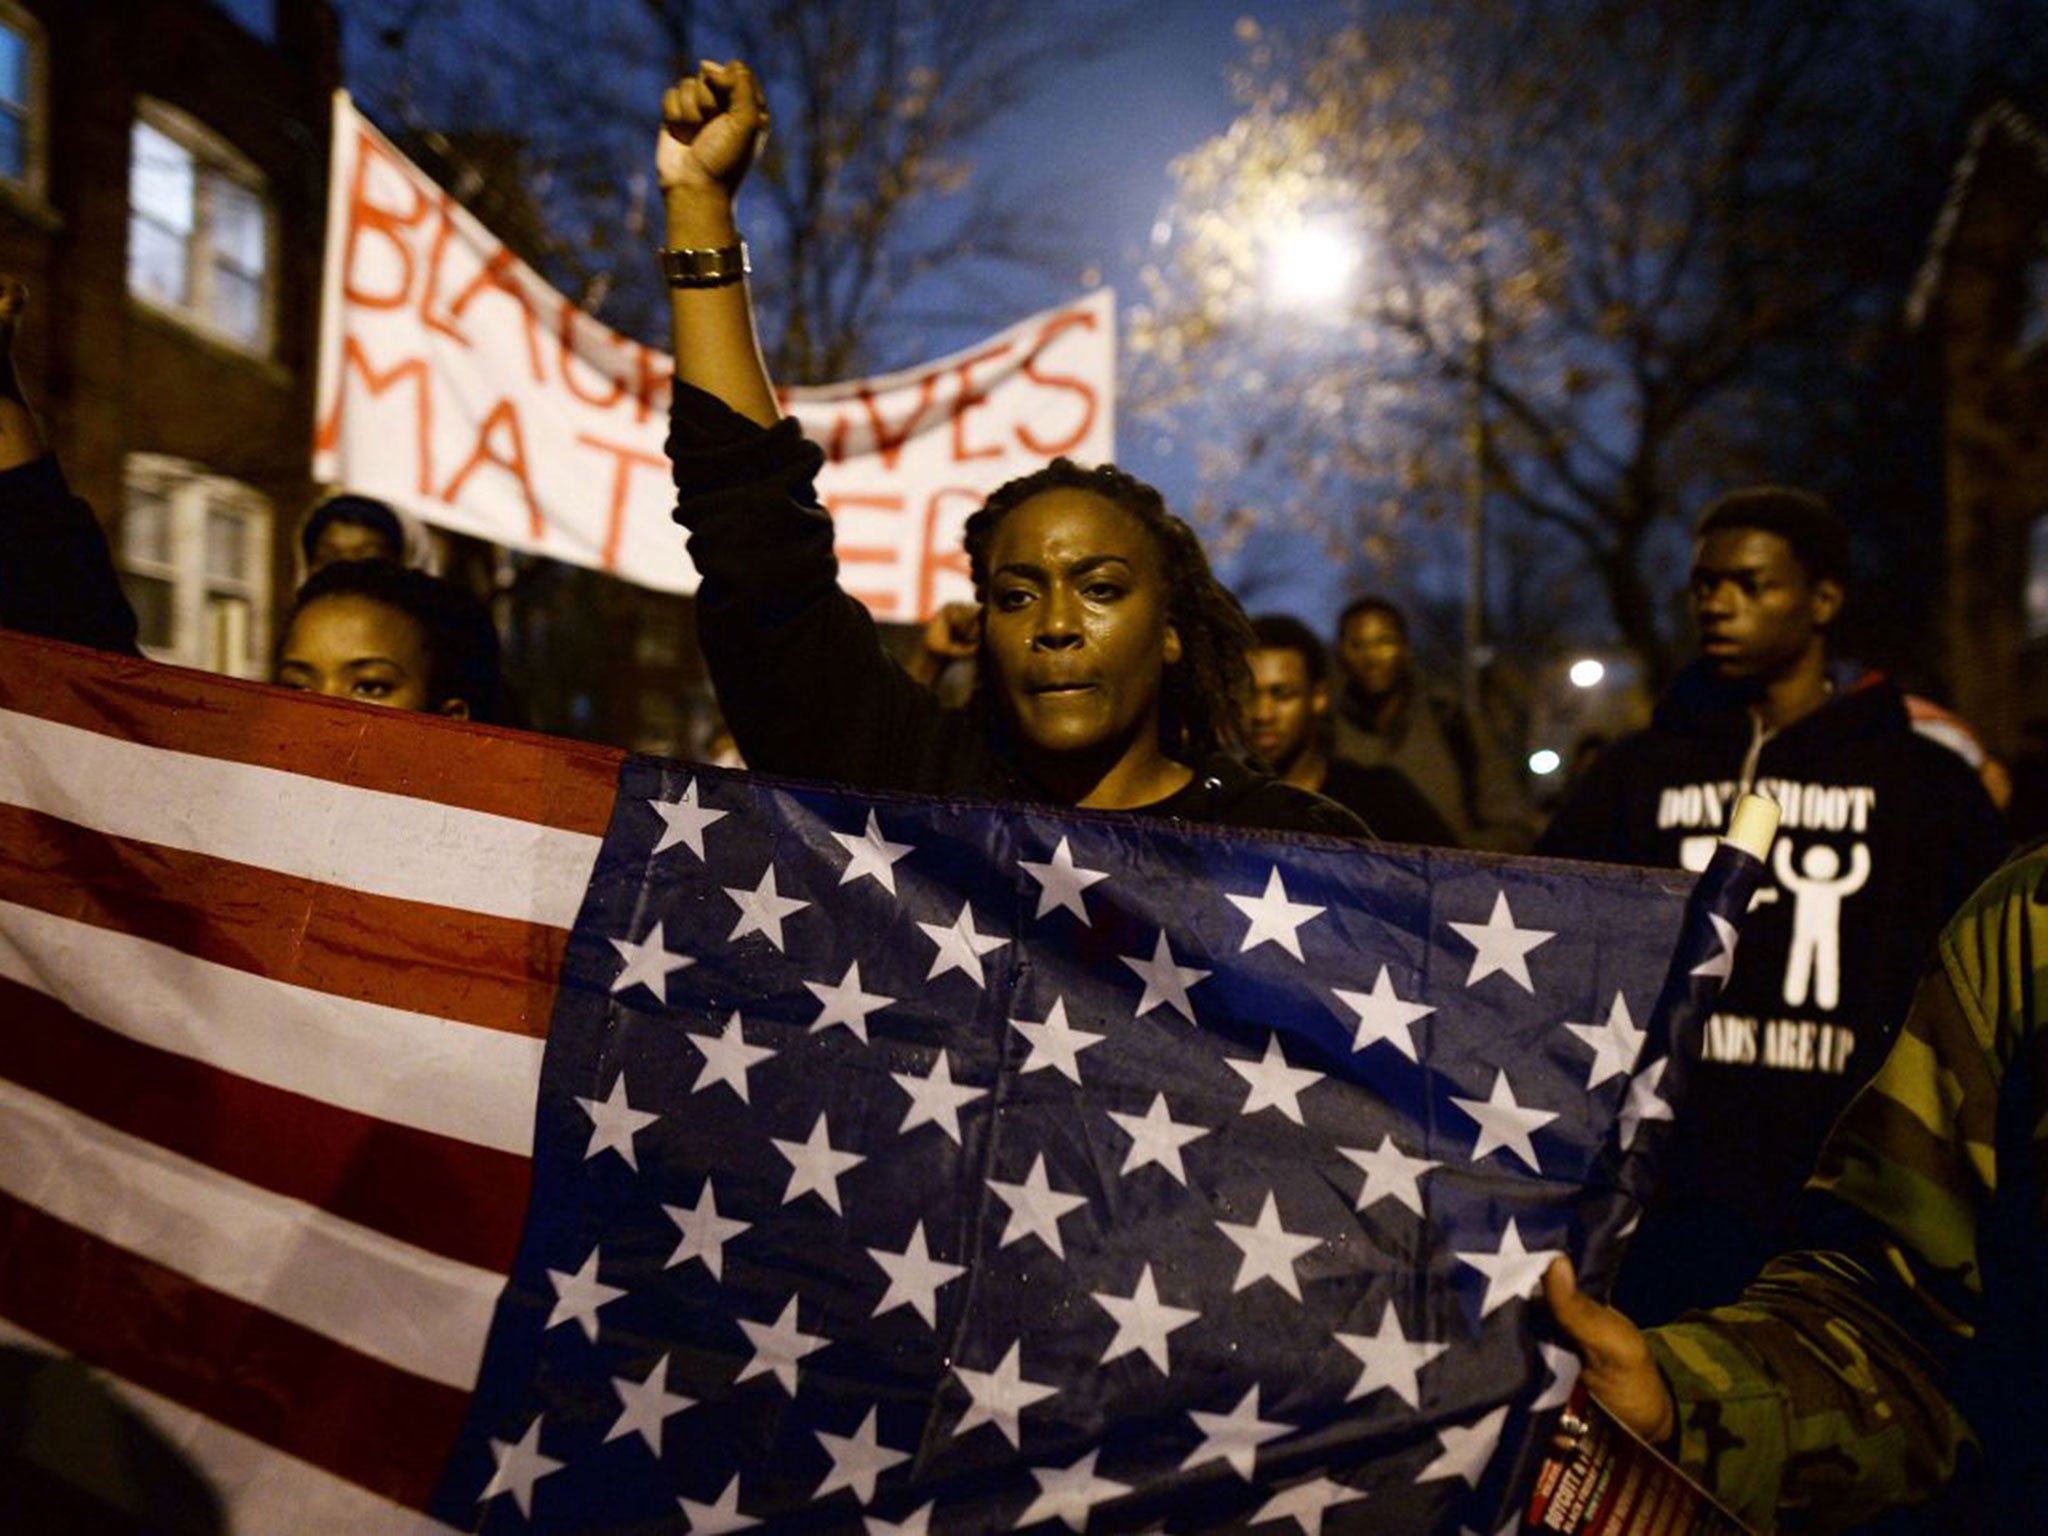 Protesters march in St Louis, Missouri, to put pressure on the grand jury to charge Officer Darren Wilson over the killing of Michael Brown